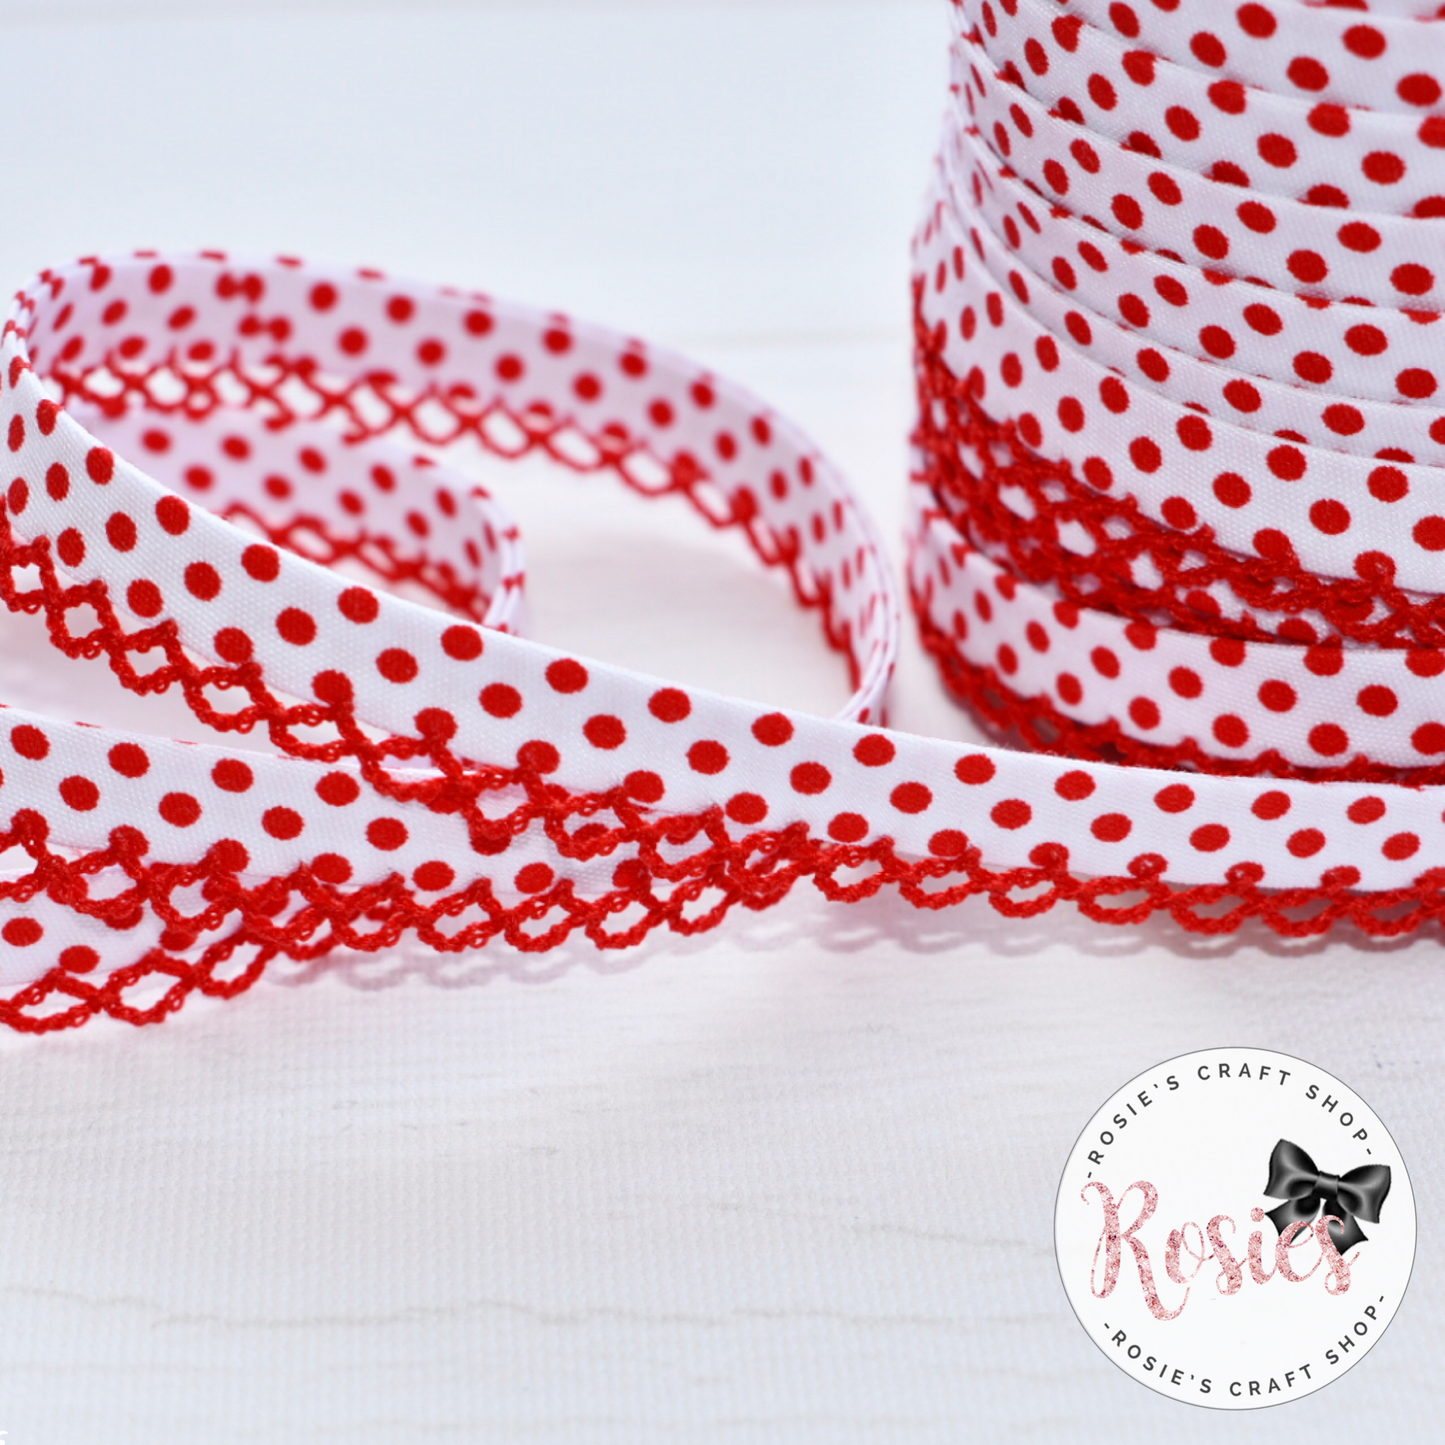 12mm White with Red Polka Dots Pre-Folded Bias Binding with Scallop Lace Edge - Rosie's Craft Shop Ltd